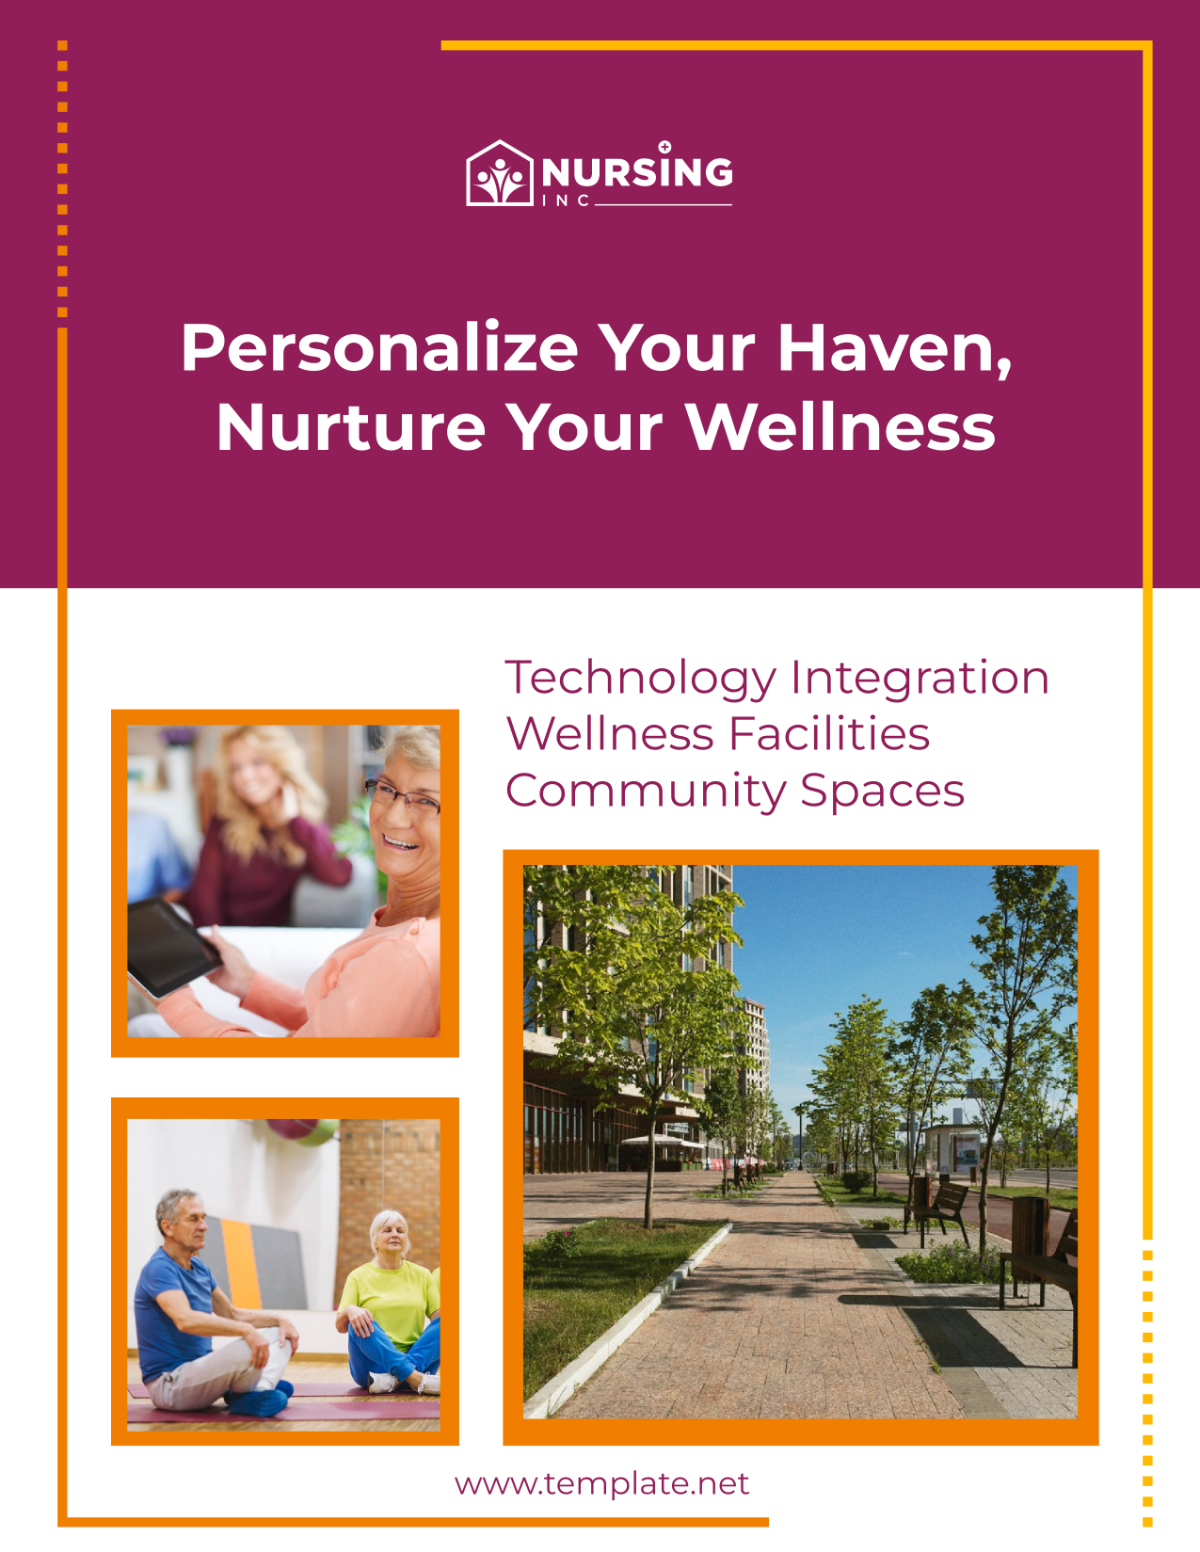 Customize Your Living Space: Options and Amenities Poster